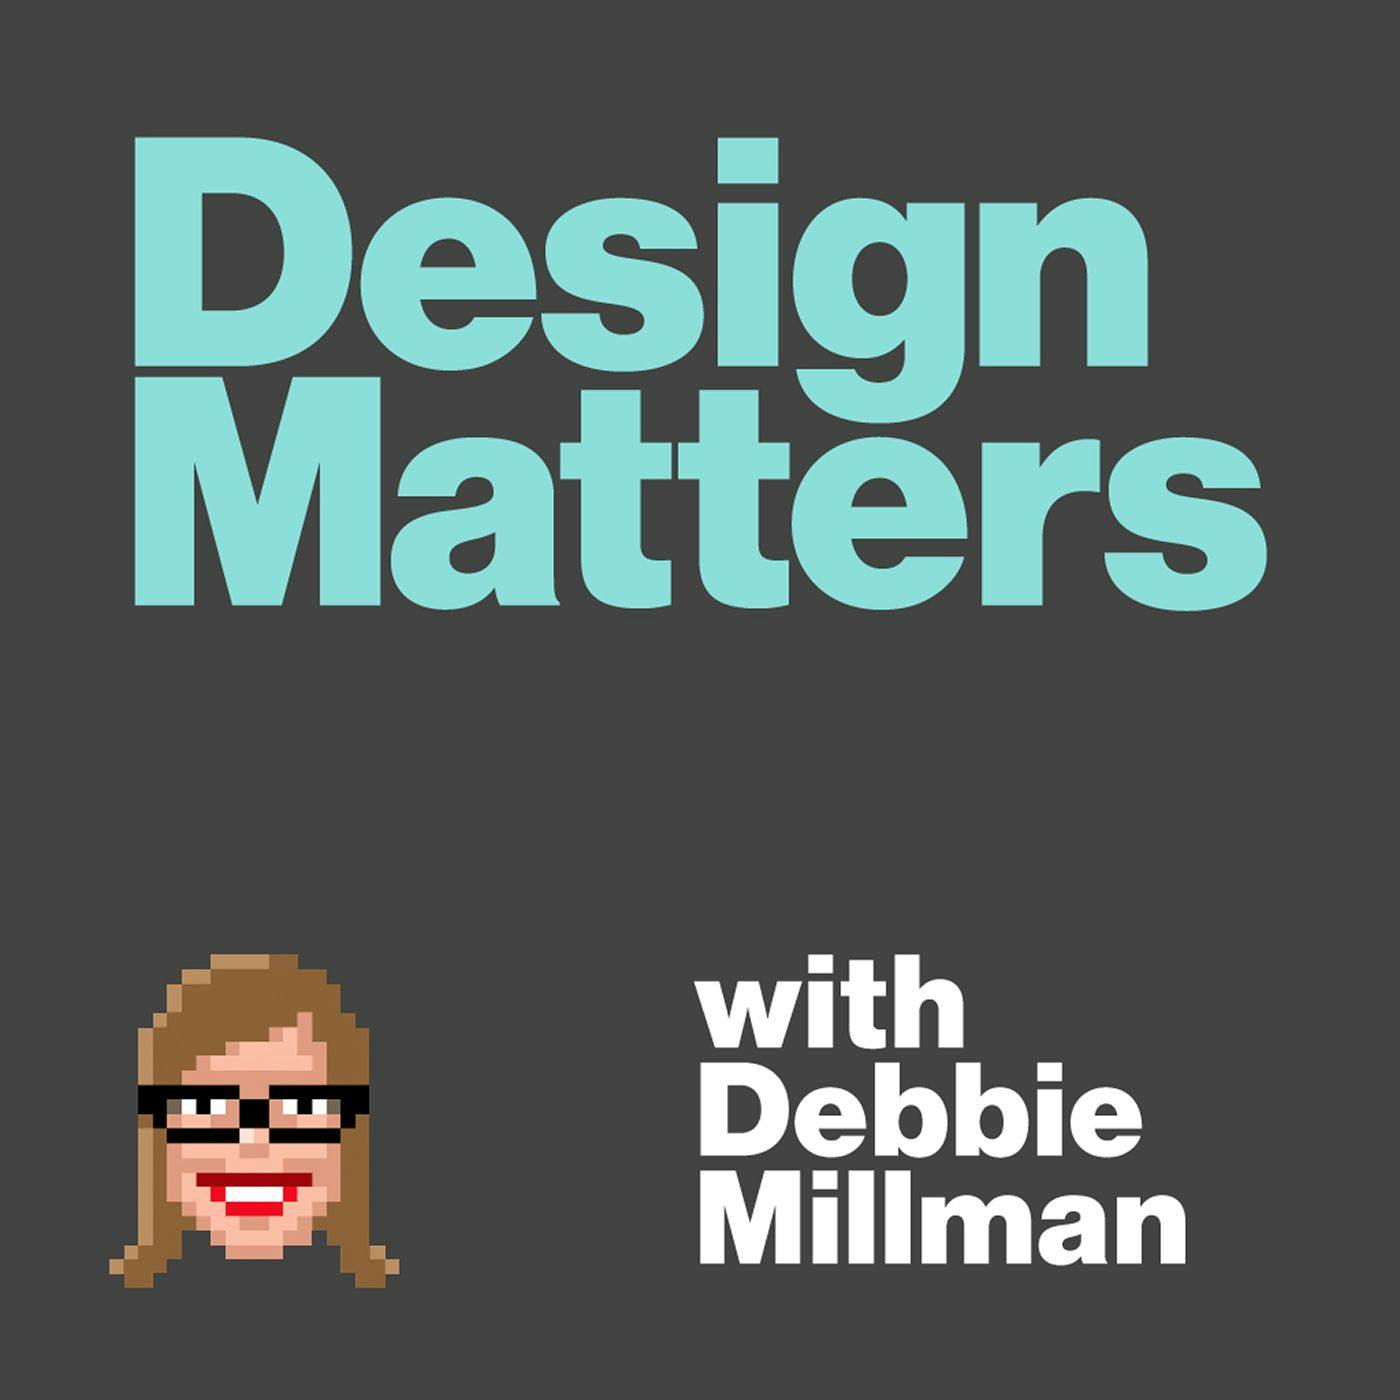 Text reads 'Design Matters with Debbie Millman' on grey background with icon of Debbie's face.